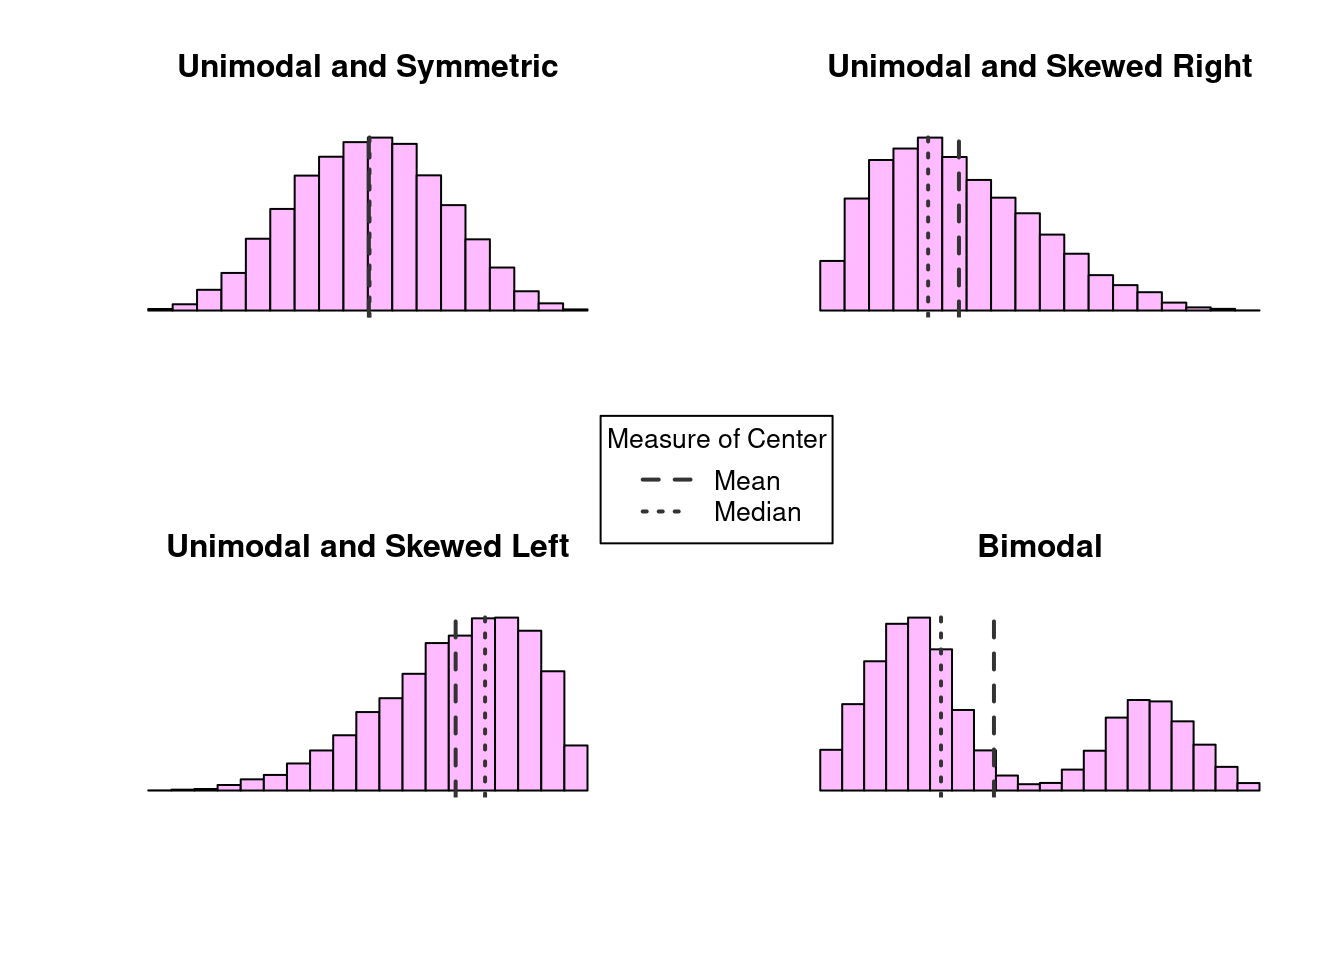 Examples of modality and skew